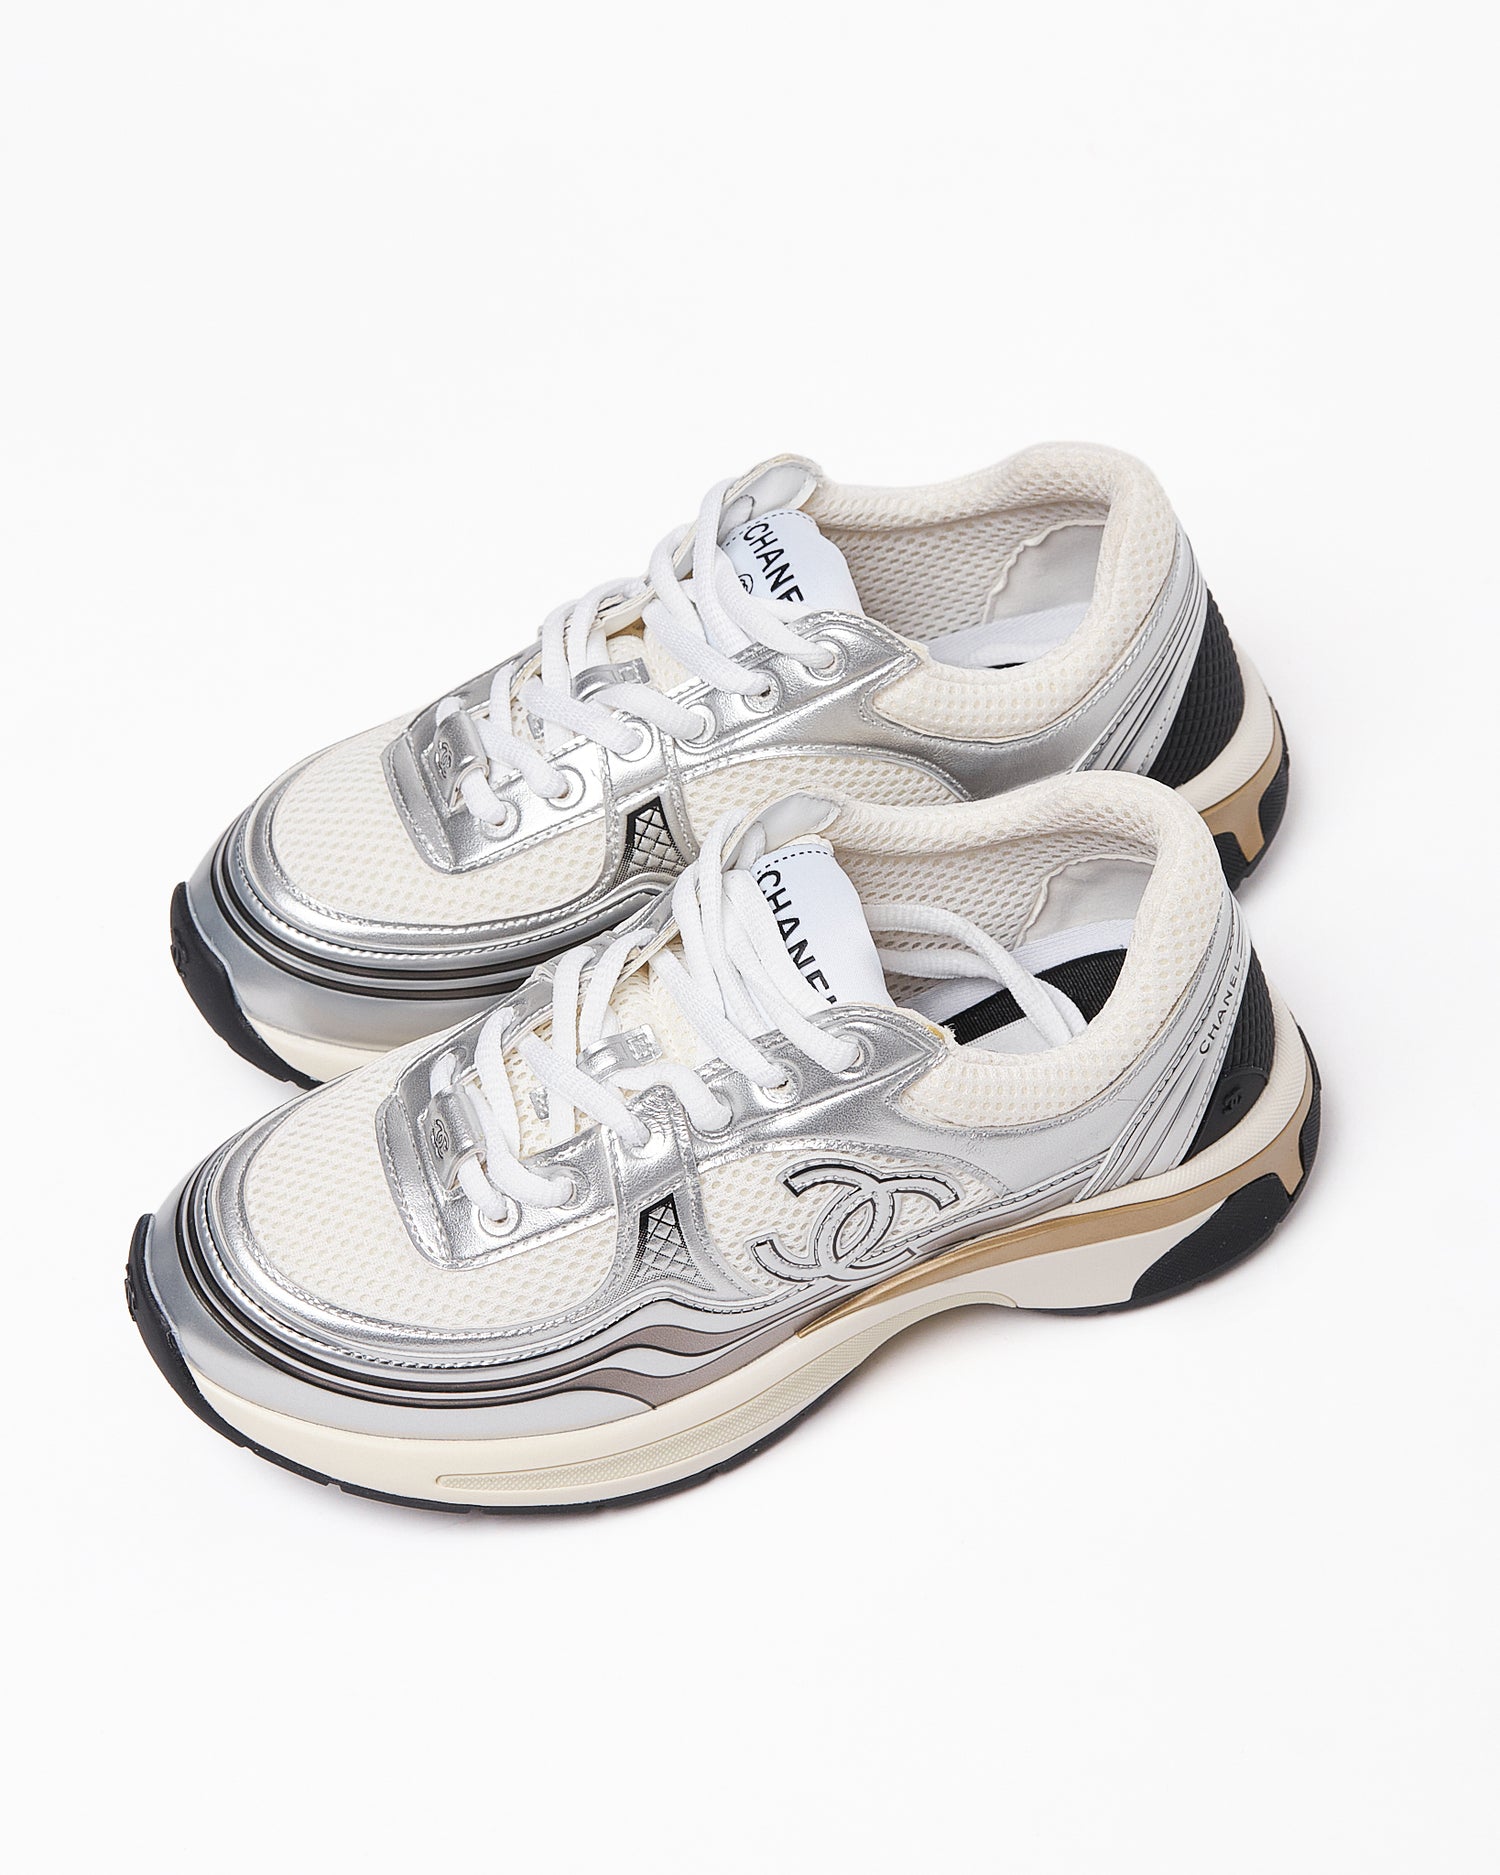 CHA Ivory Lady Sneakers Shoes 140.90